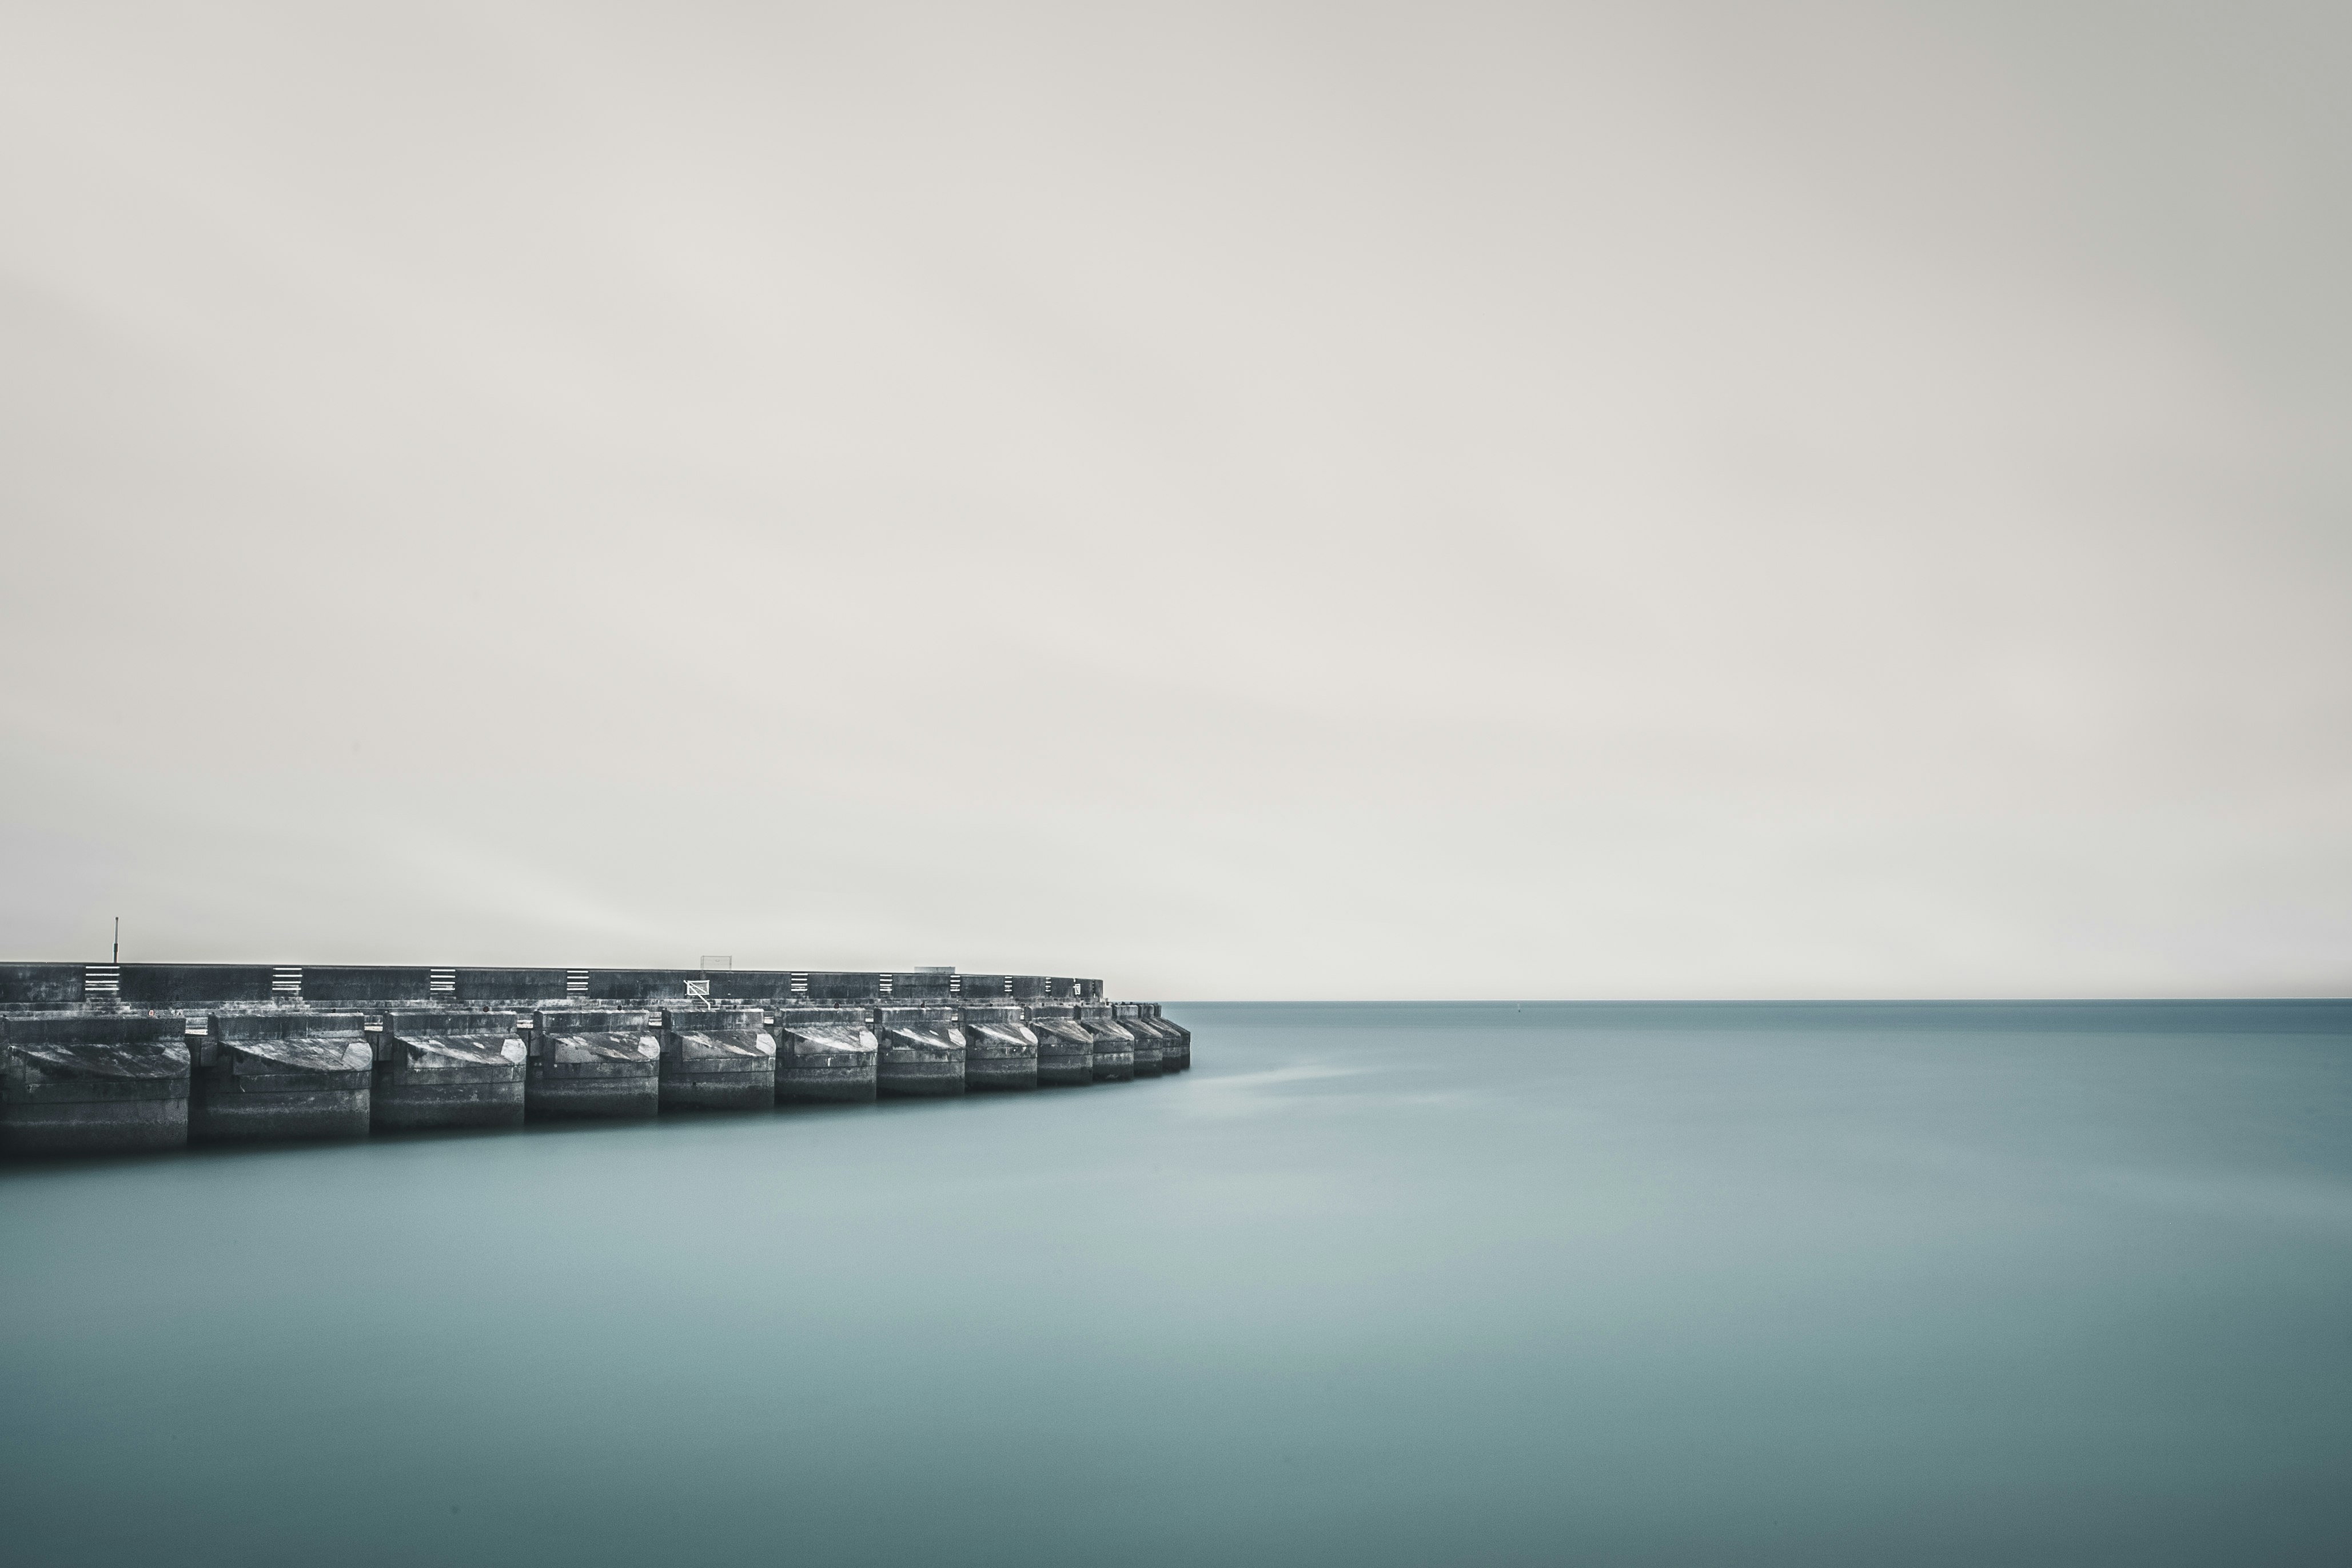 gray concrete dock on body of water during daytime